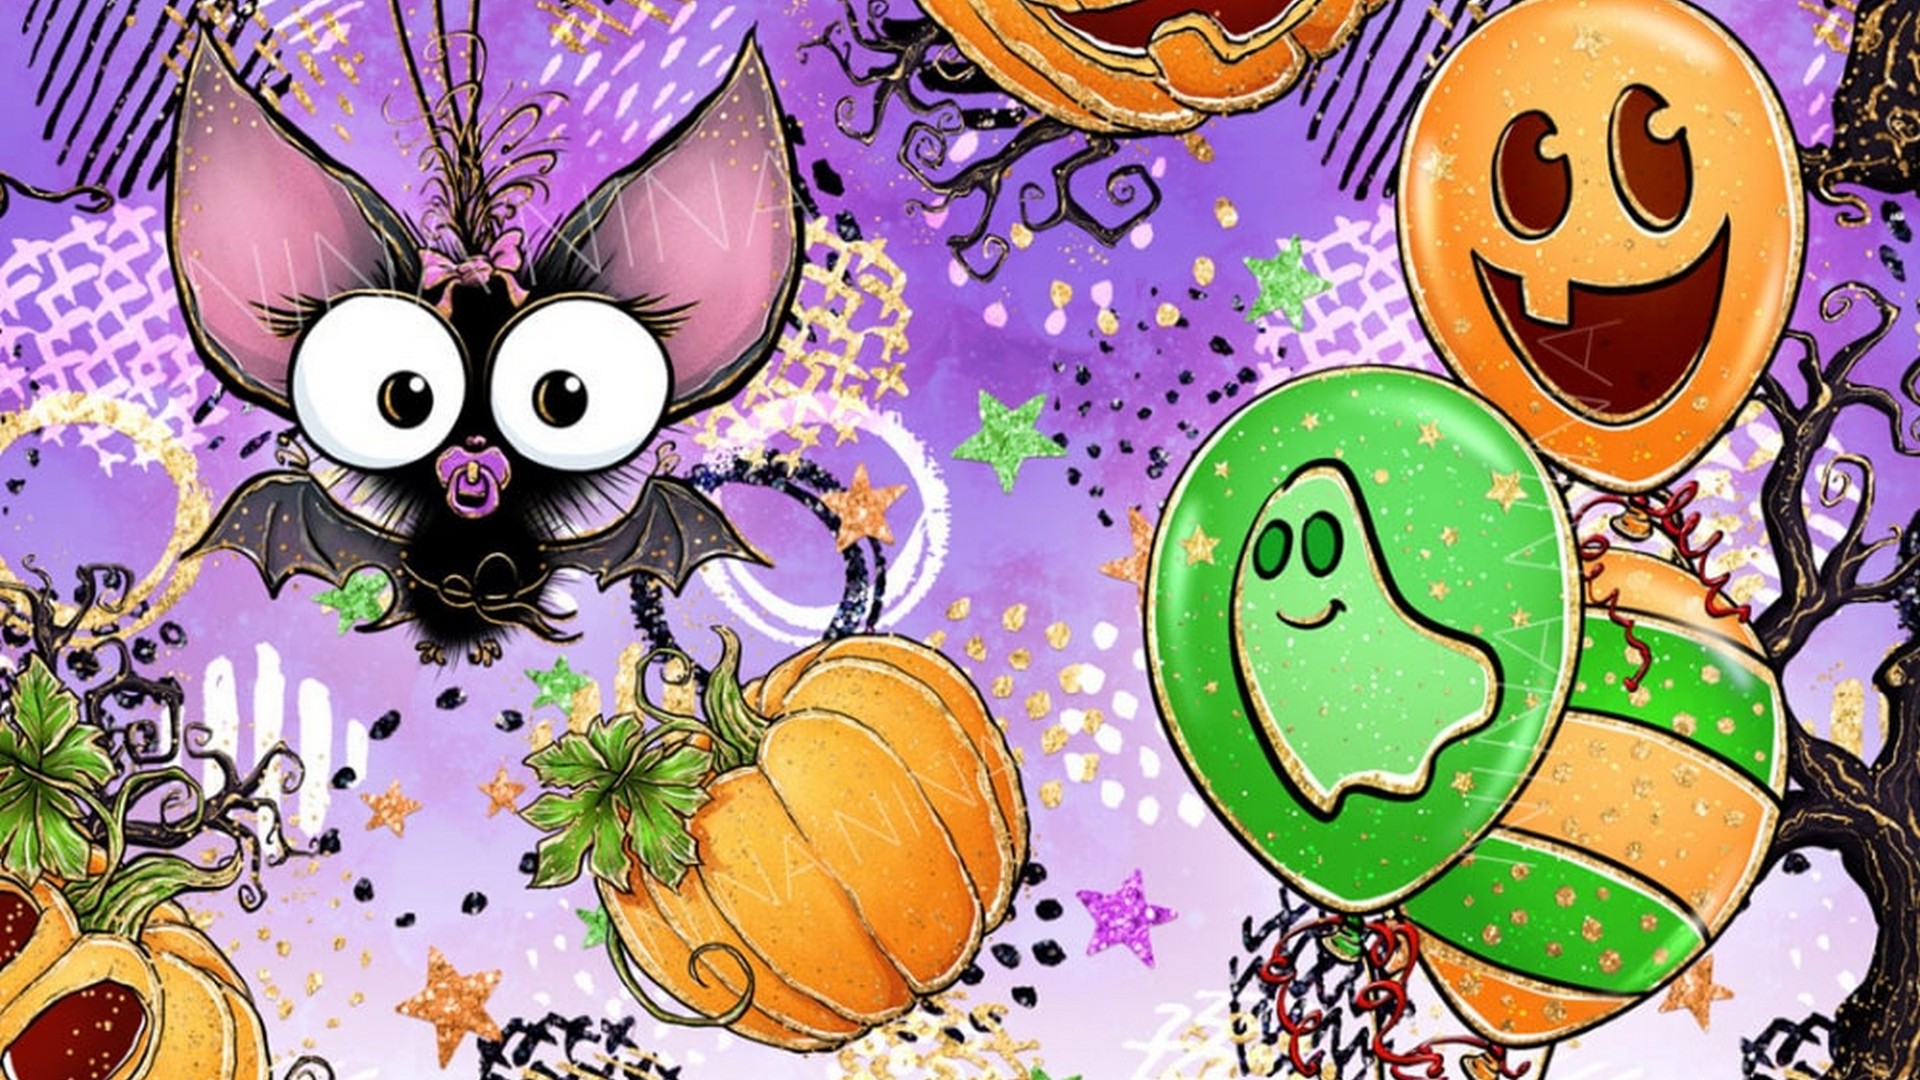 HD Halloween Backgrounds with high-resolution 1920x1080 pixel. You can use this wallpaper for your Windows and Mac OS computers as well as your Android and iPhone smartphones